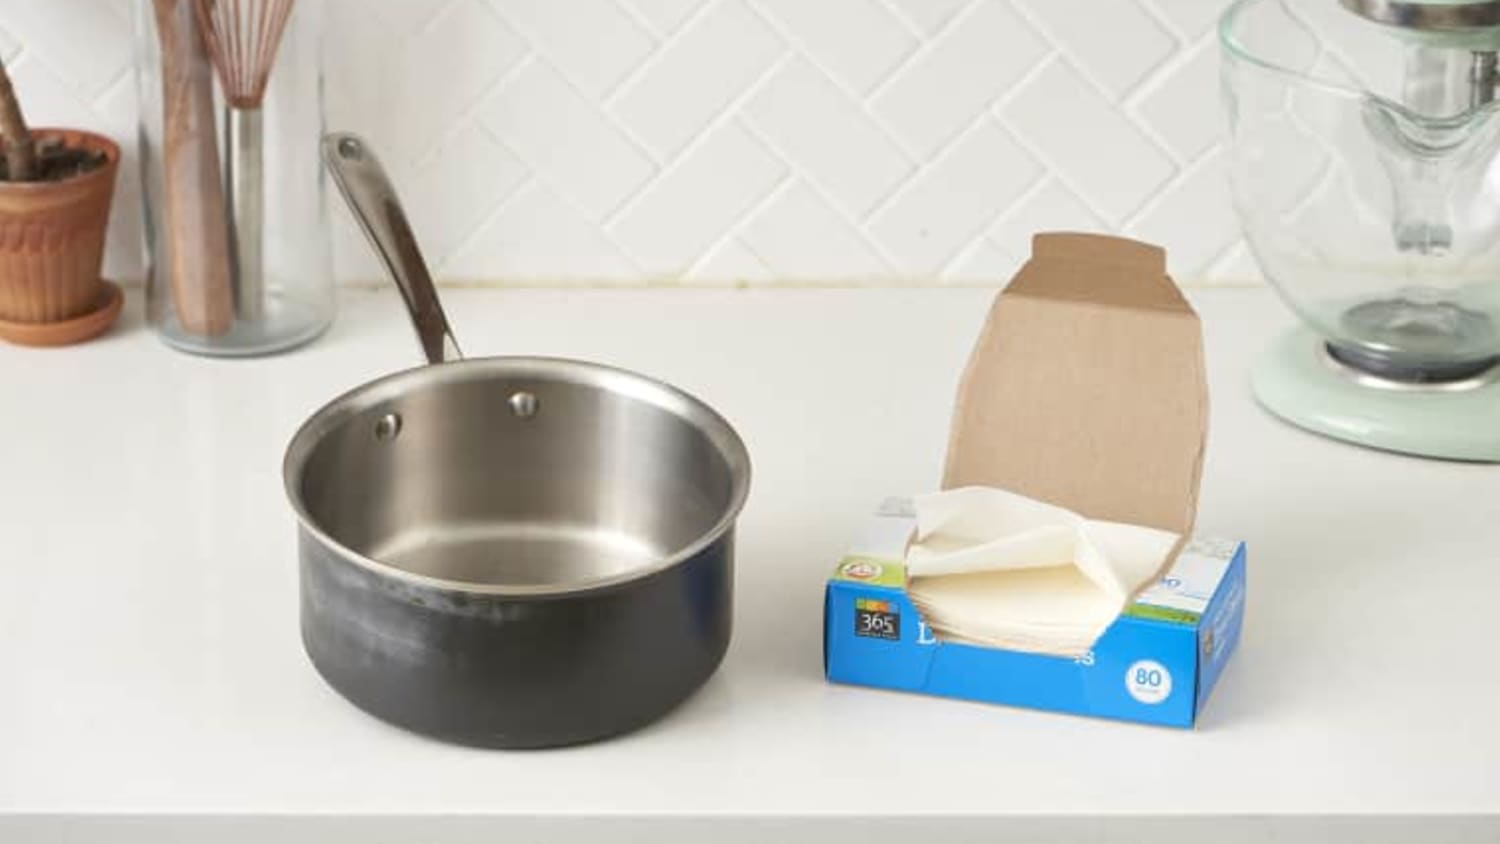 Dryer sheets can be used to clean your ceramic pan